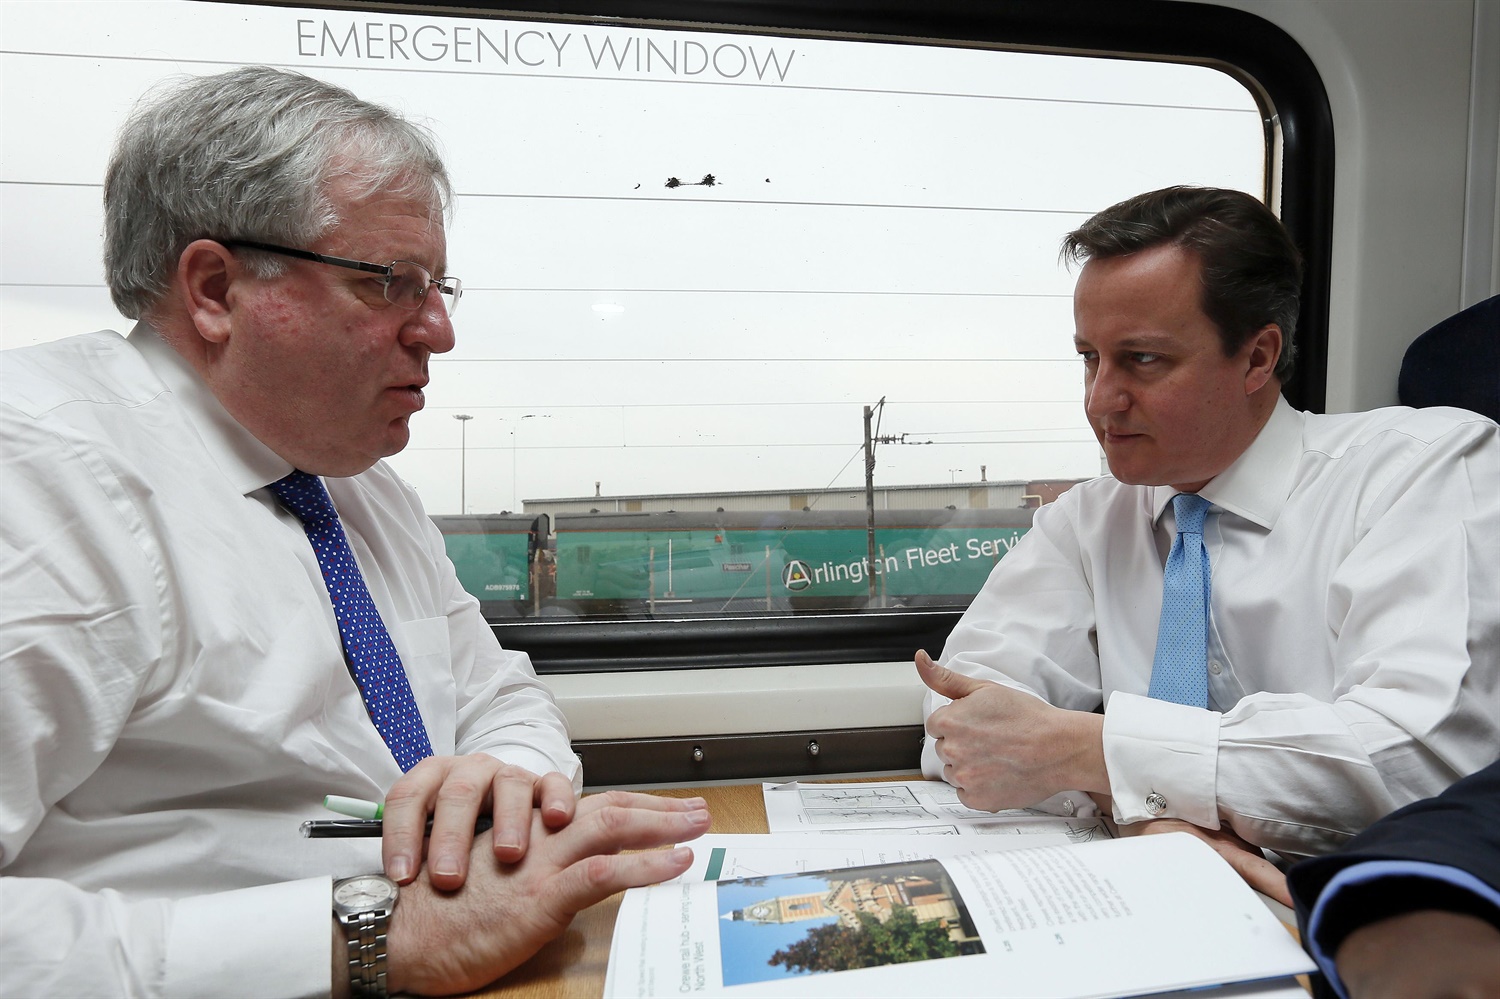 ‘We’ve never done this kind of thing before’ says McLoughlin as electrification costs rise